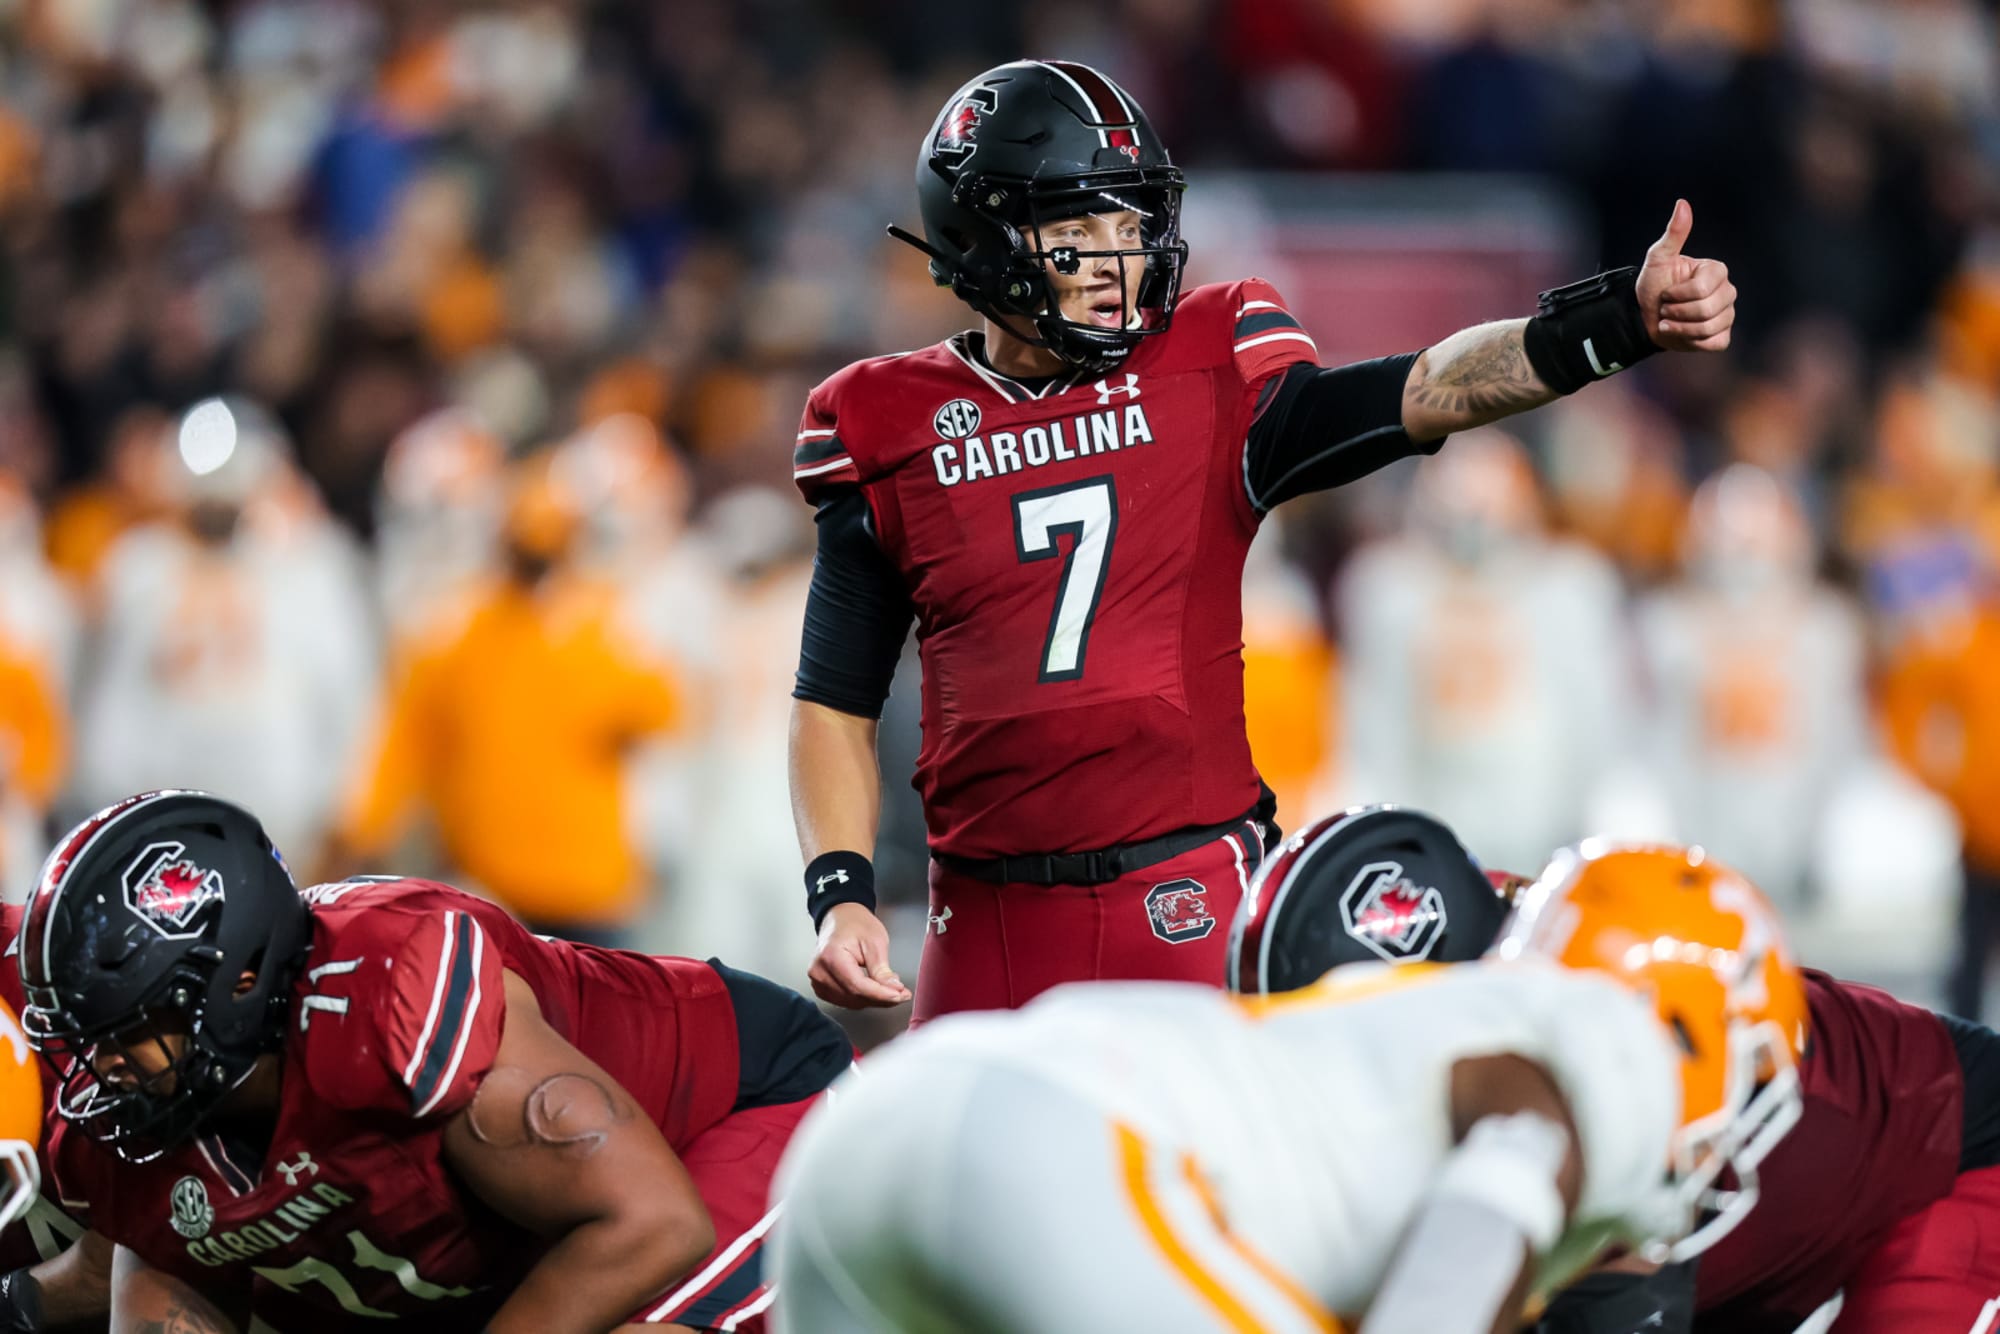 Final 2022 NFL Draft Projections For South Carolina Players